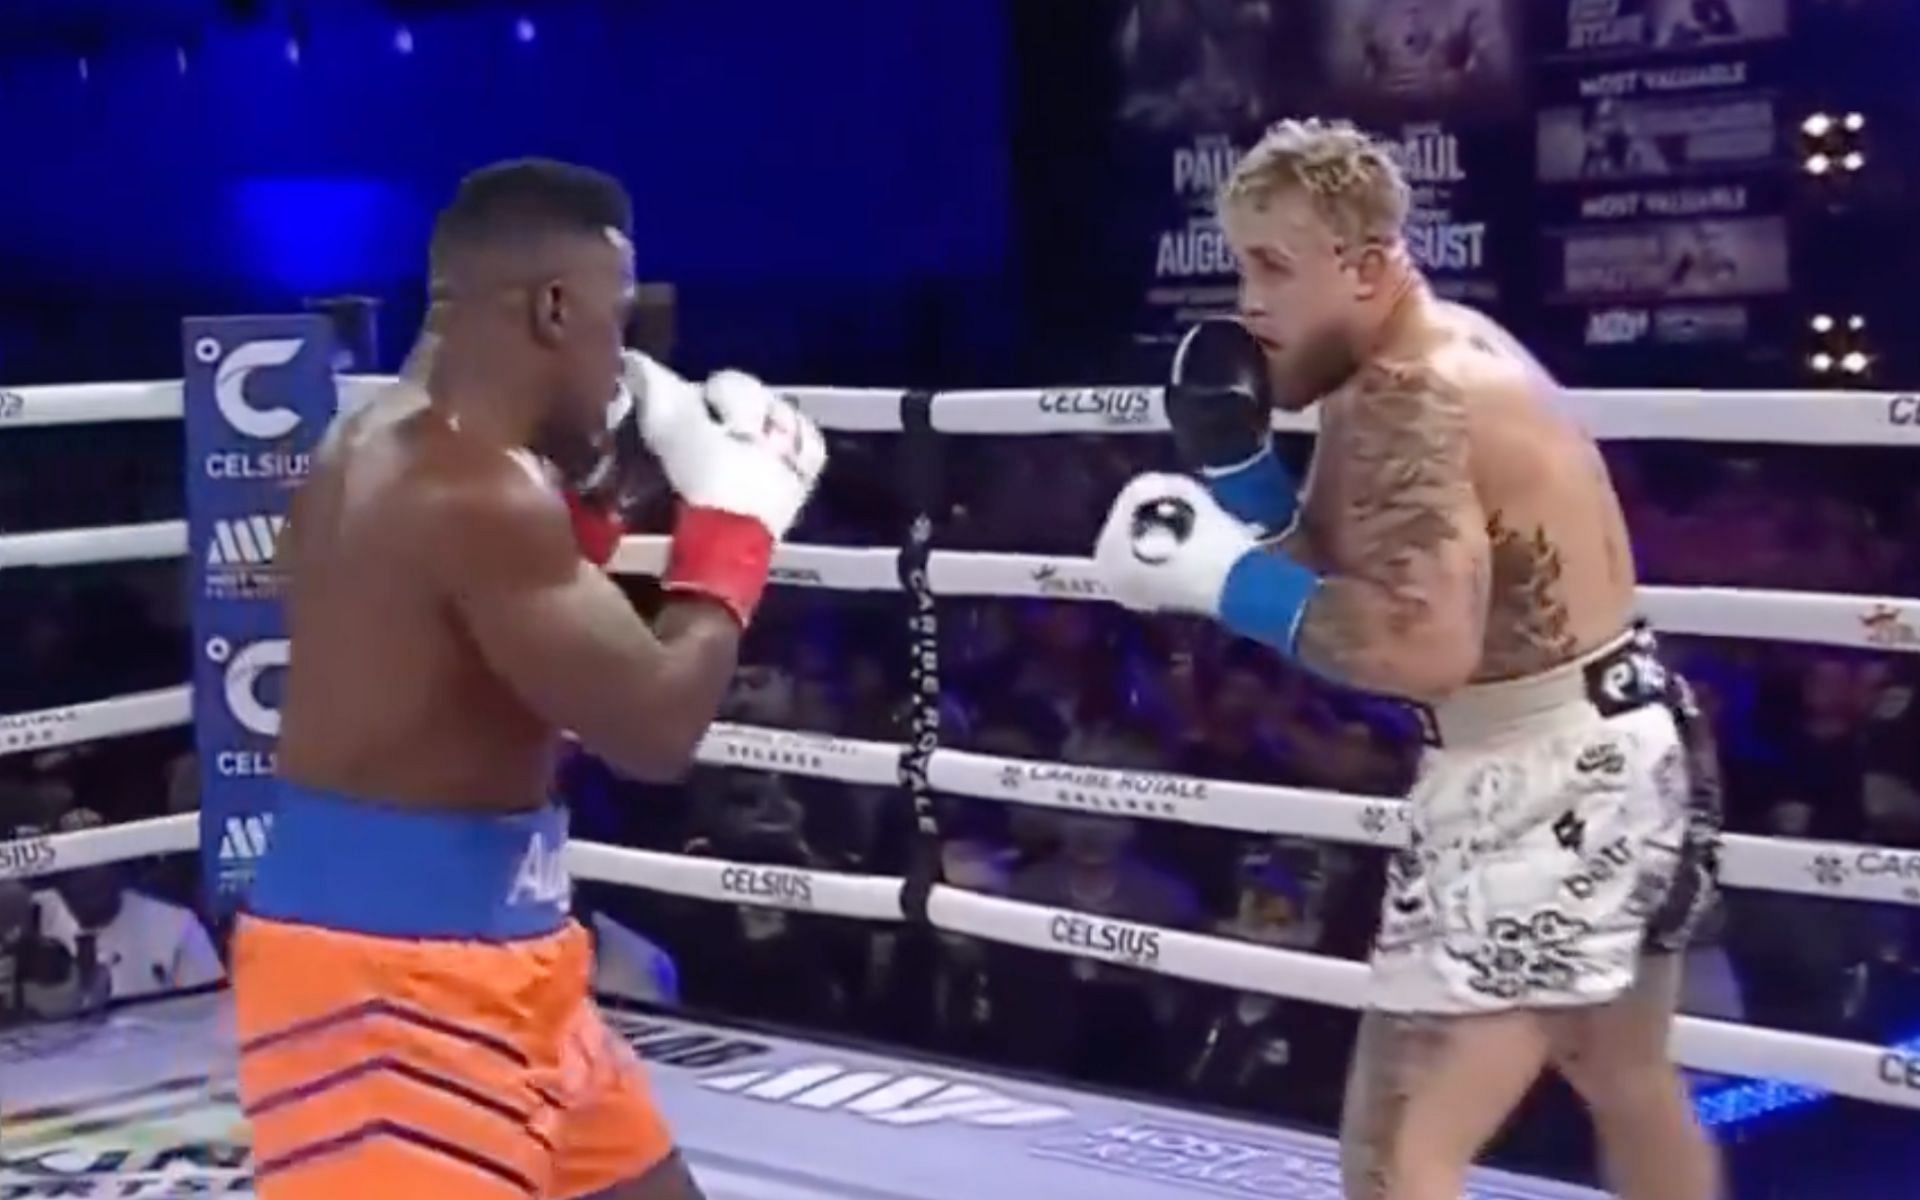 Jake Paul takes on Andre August. (via X @HappyPunch)